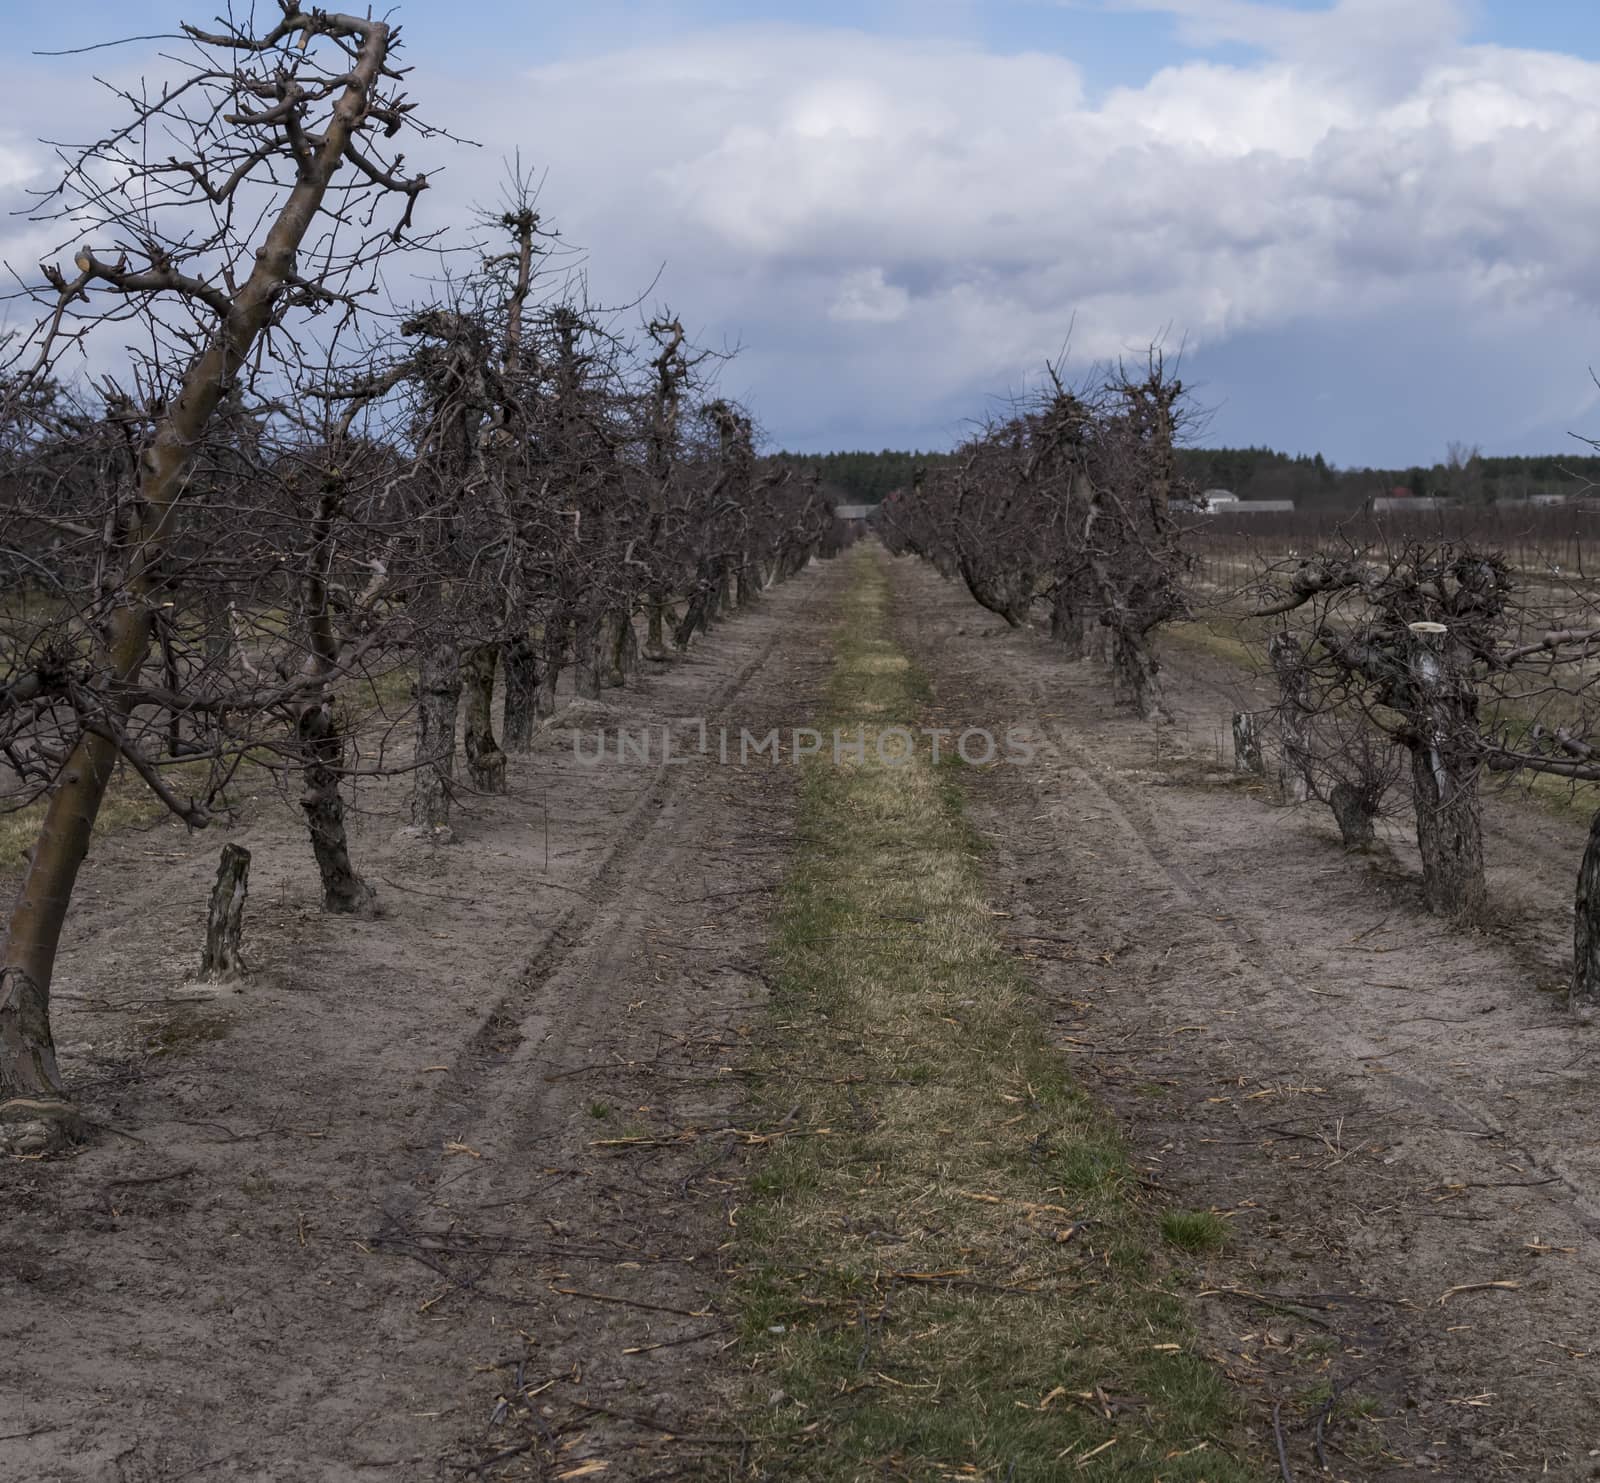 landscape with empty old apple trees without leaves and fruits at the beginning of spring